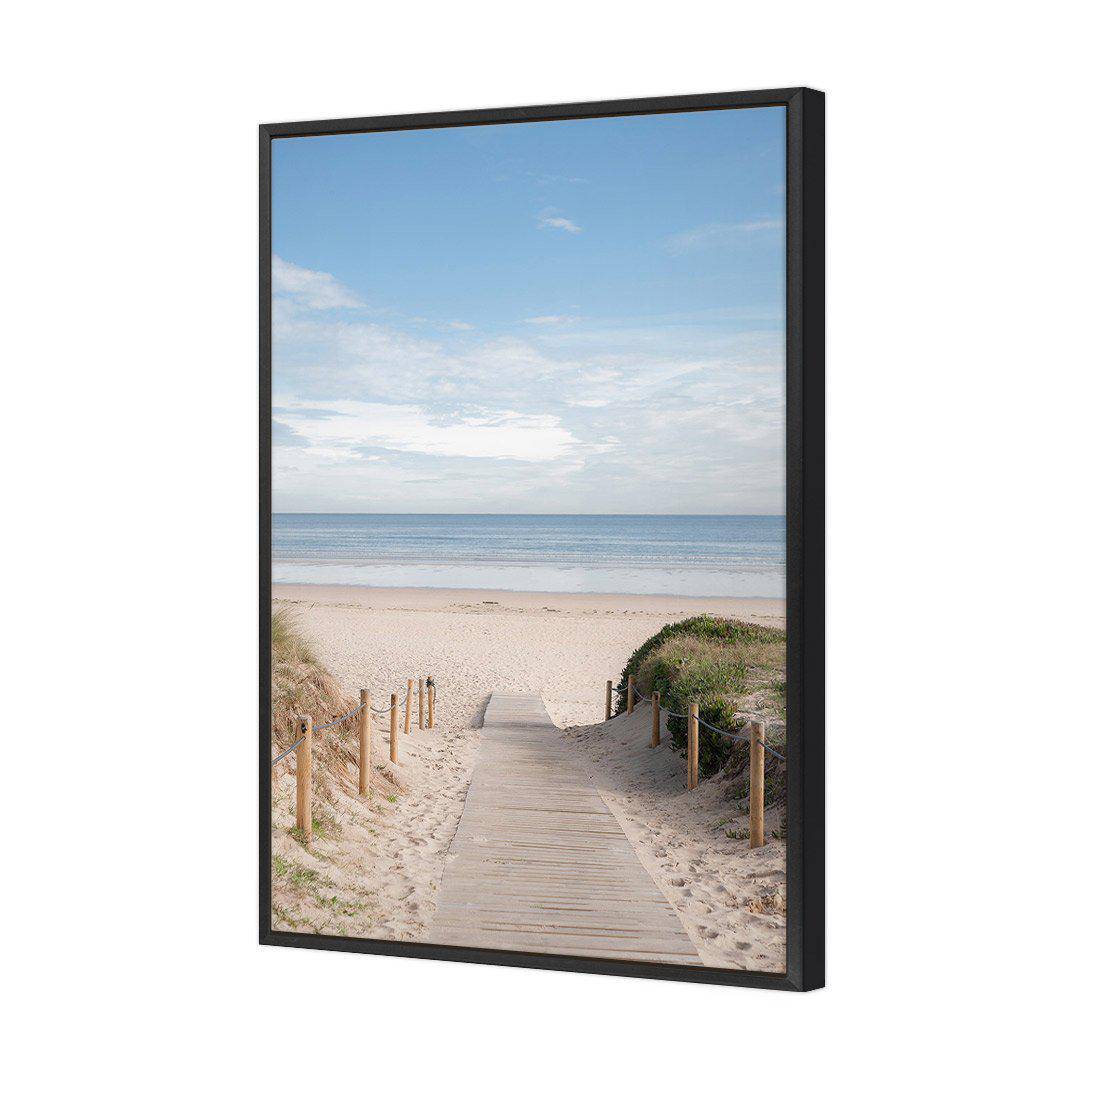 Pathway To The Sea Canvas Art-Canvas-Wall Art Designs-45x30cm-Canvas - Black Frame-Wall Art Designs